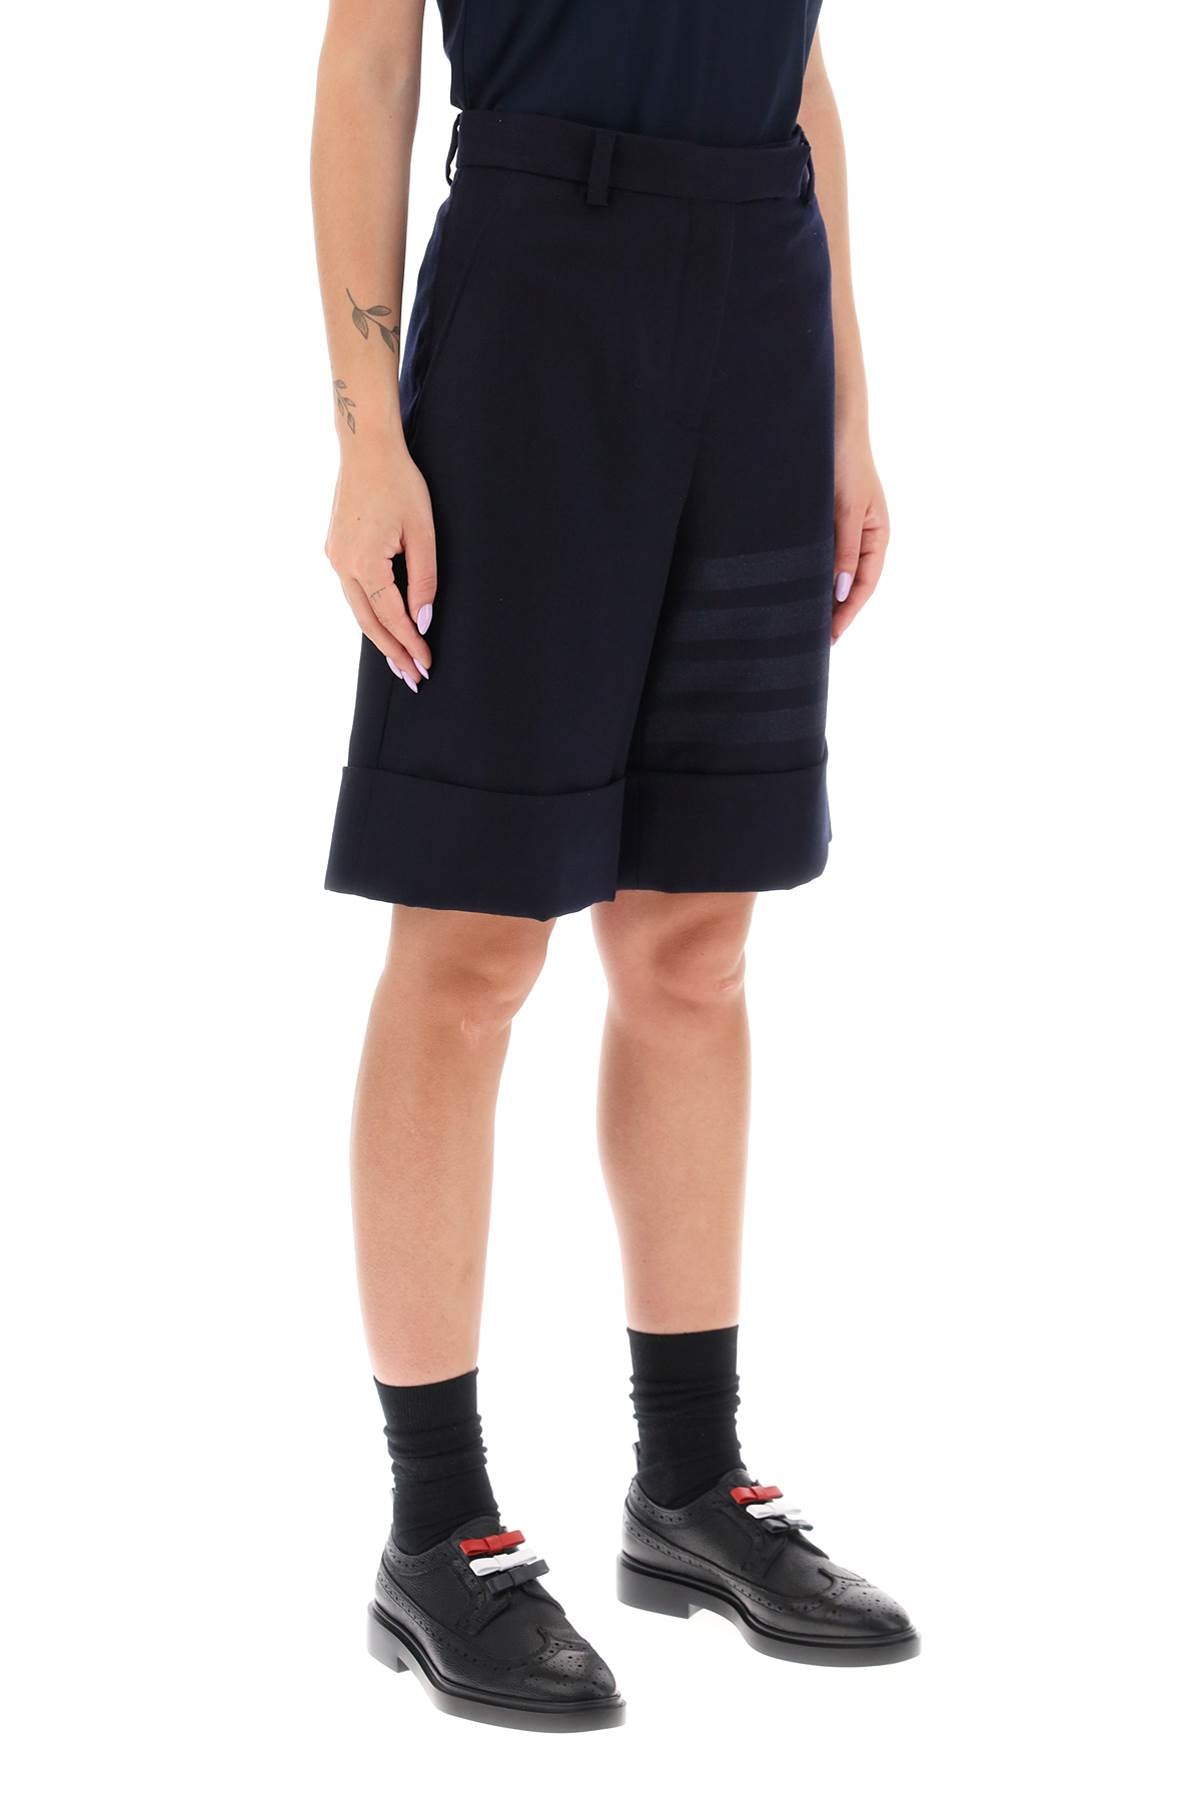 Thom browne shorts in flannel with 4-bar motif-1